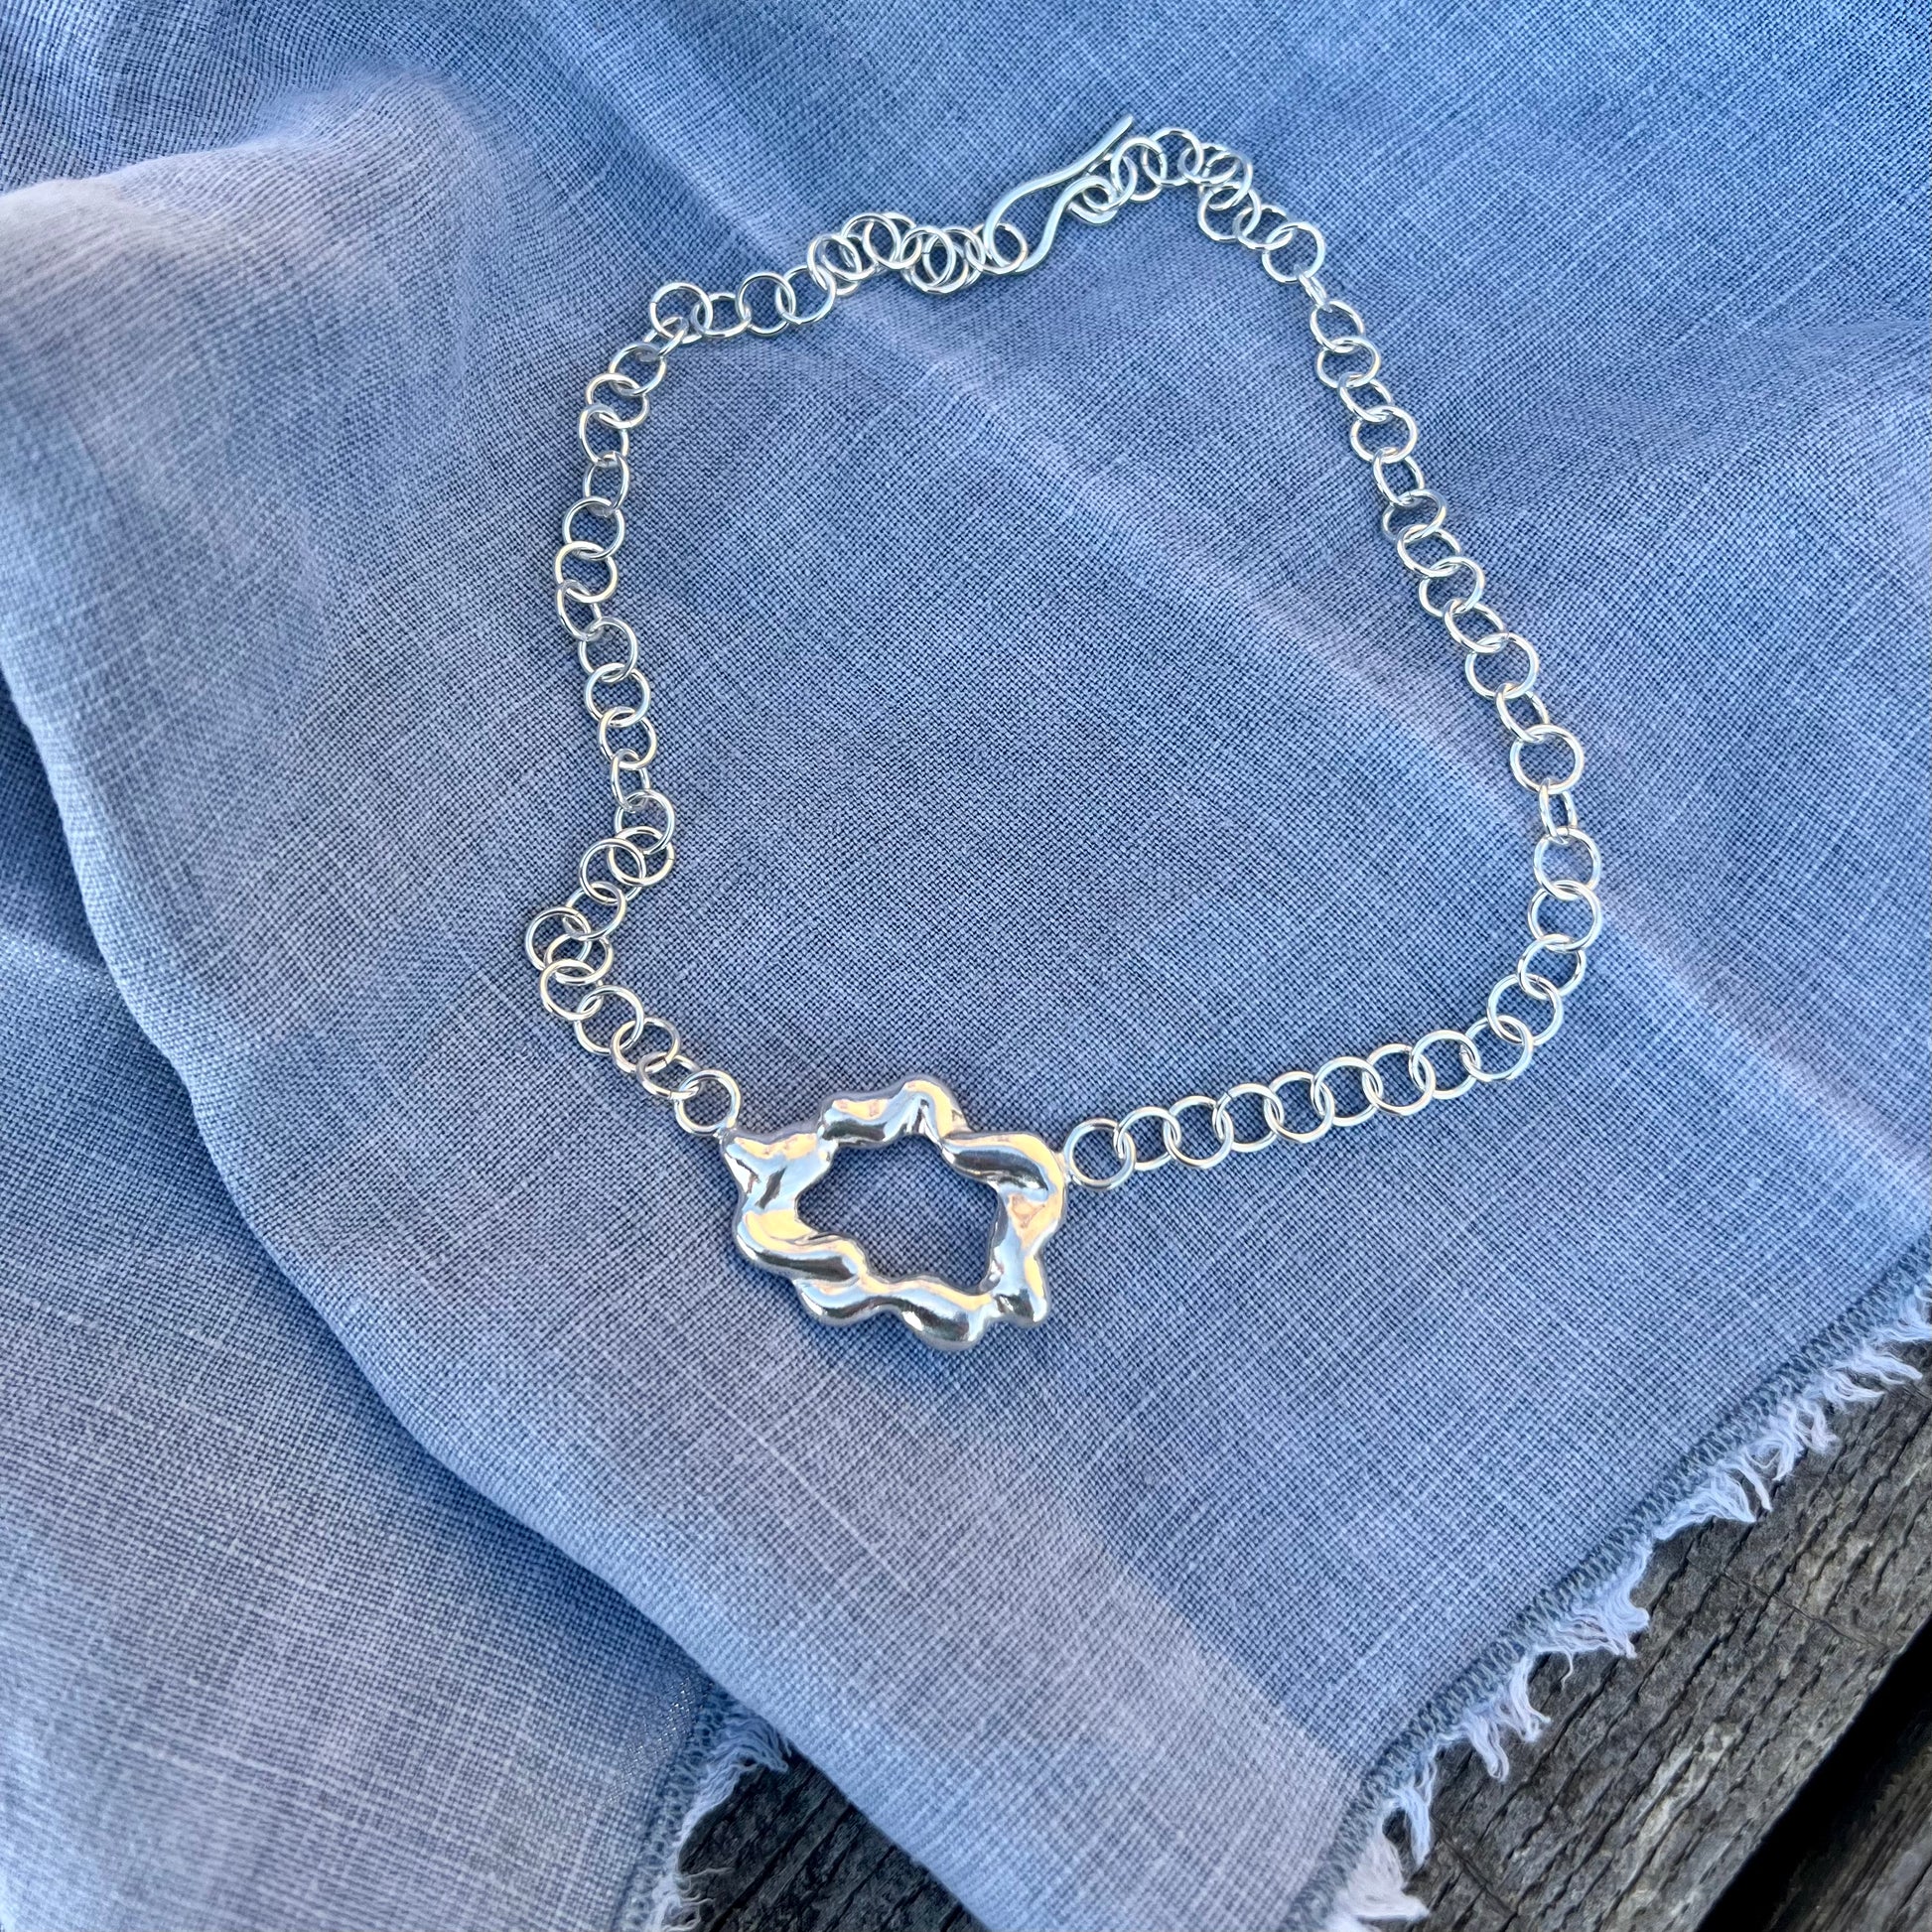 A chunky, statement handmade sterling silver necklace on a blue linen background. The centrepiece of the necklace is shaped like a cloud and it has a handmade hook clasp.